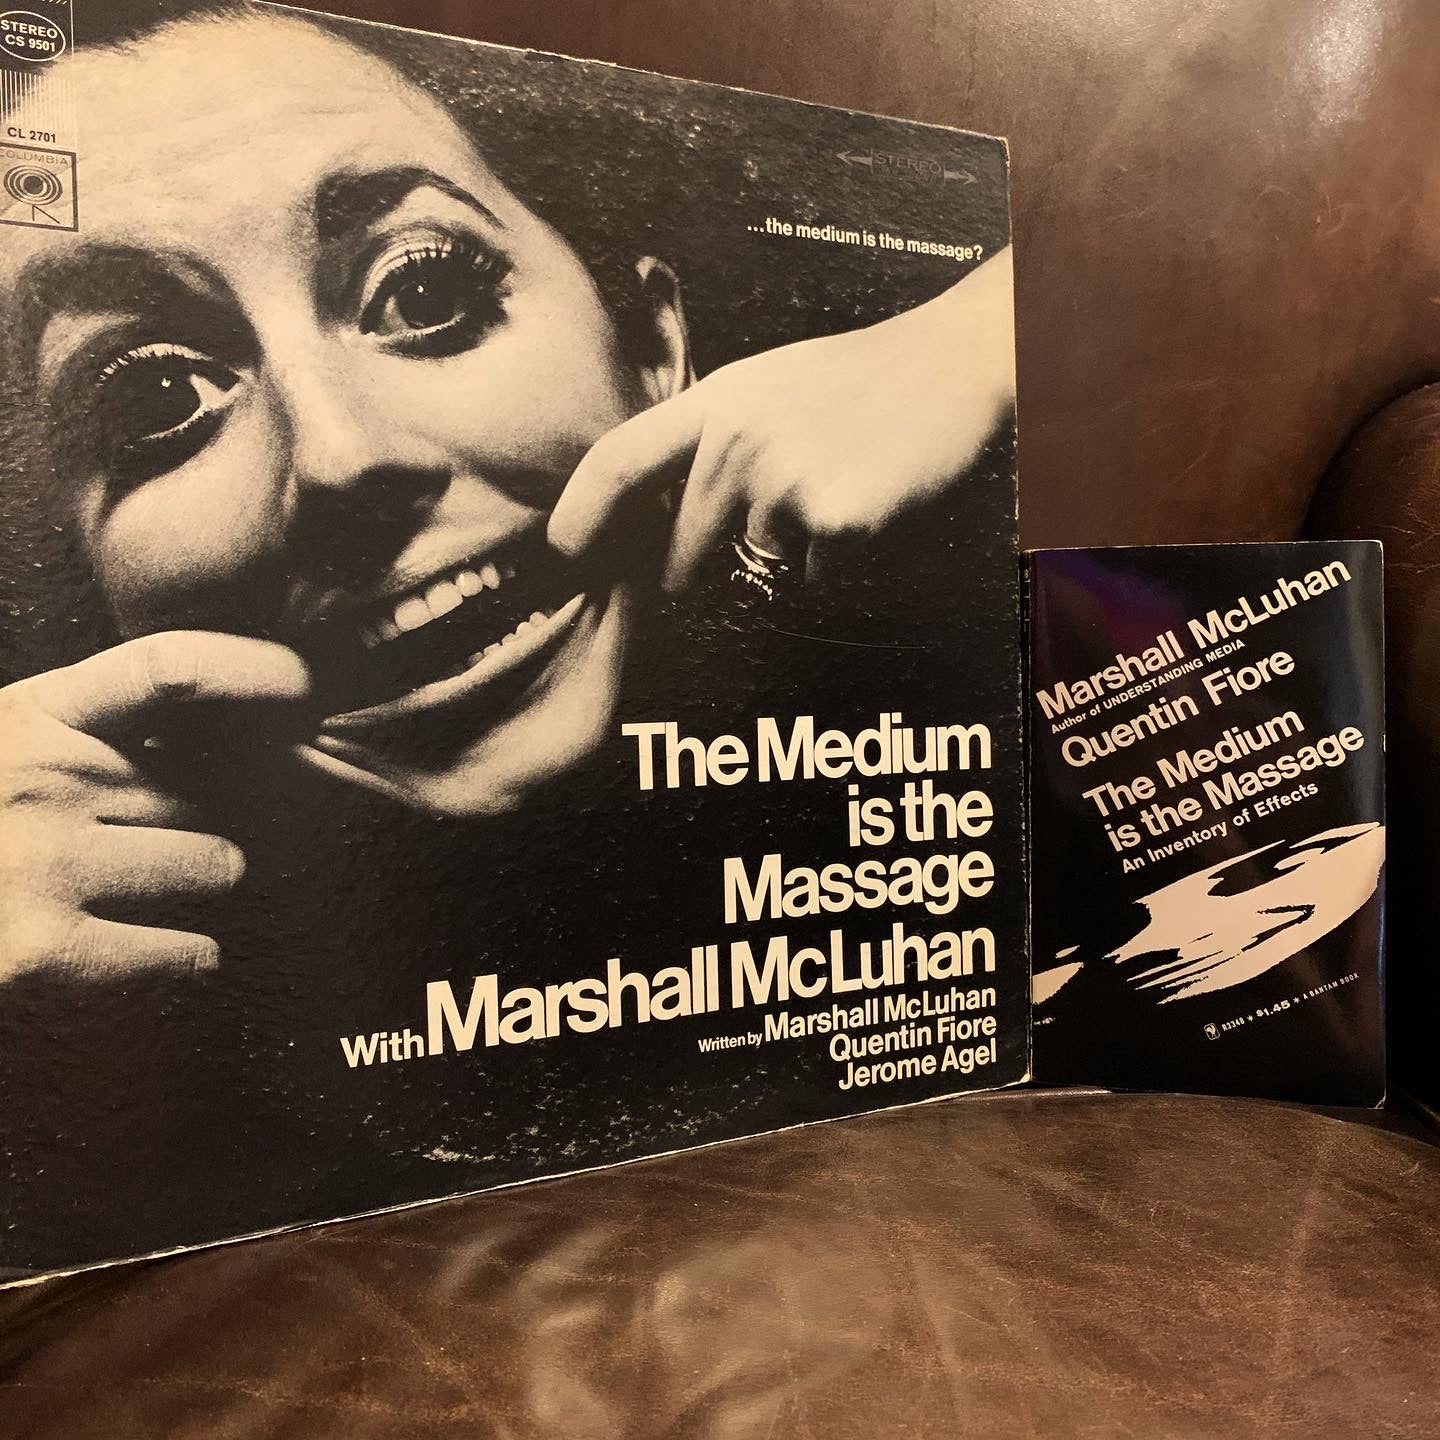 The Medium is the Massage vinyl and book pairing